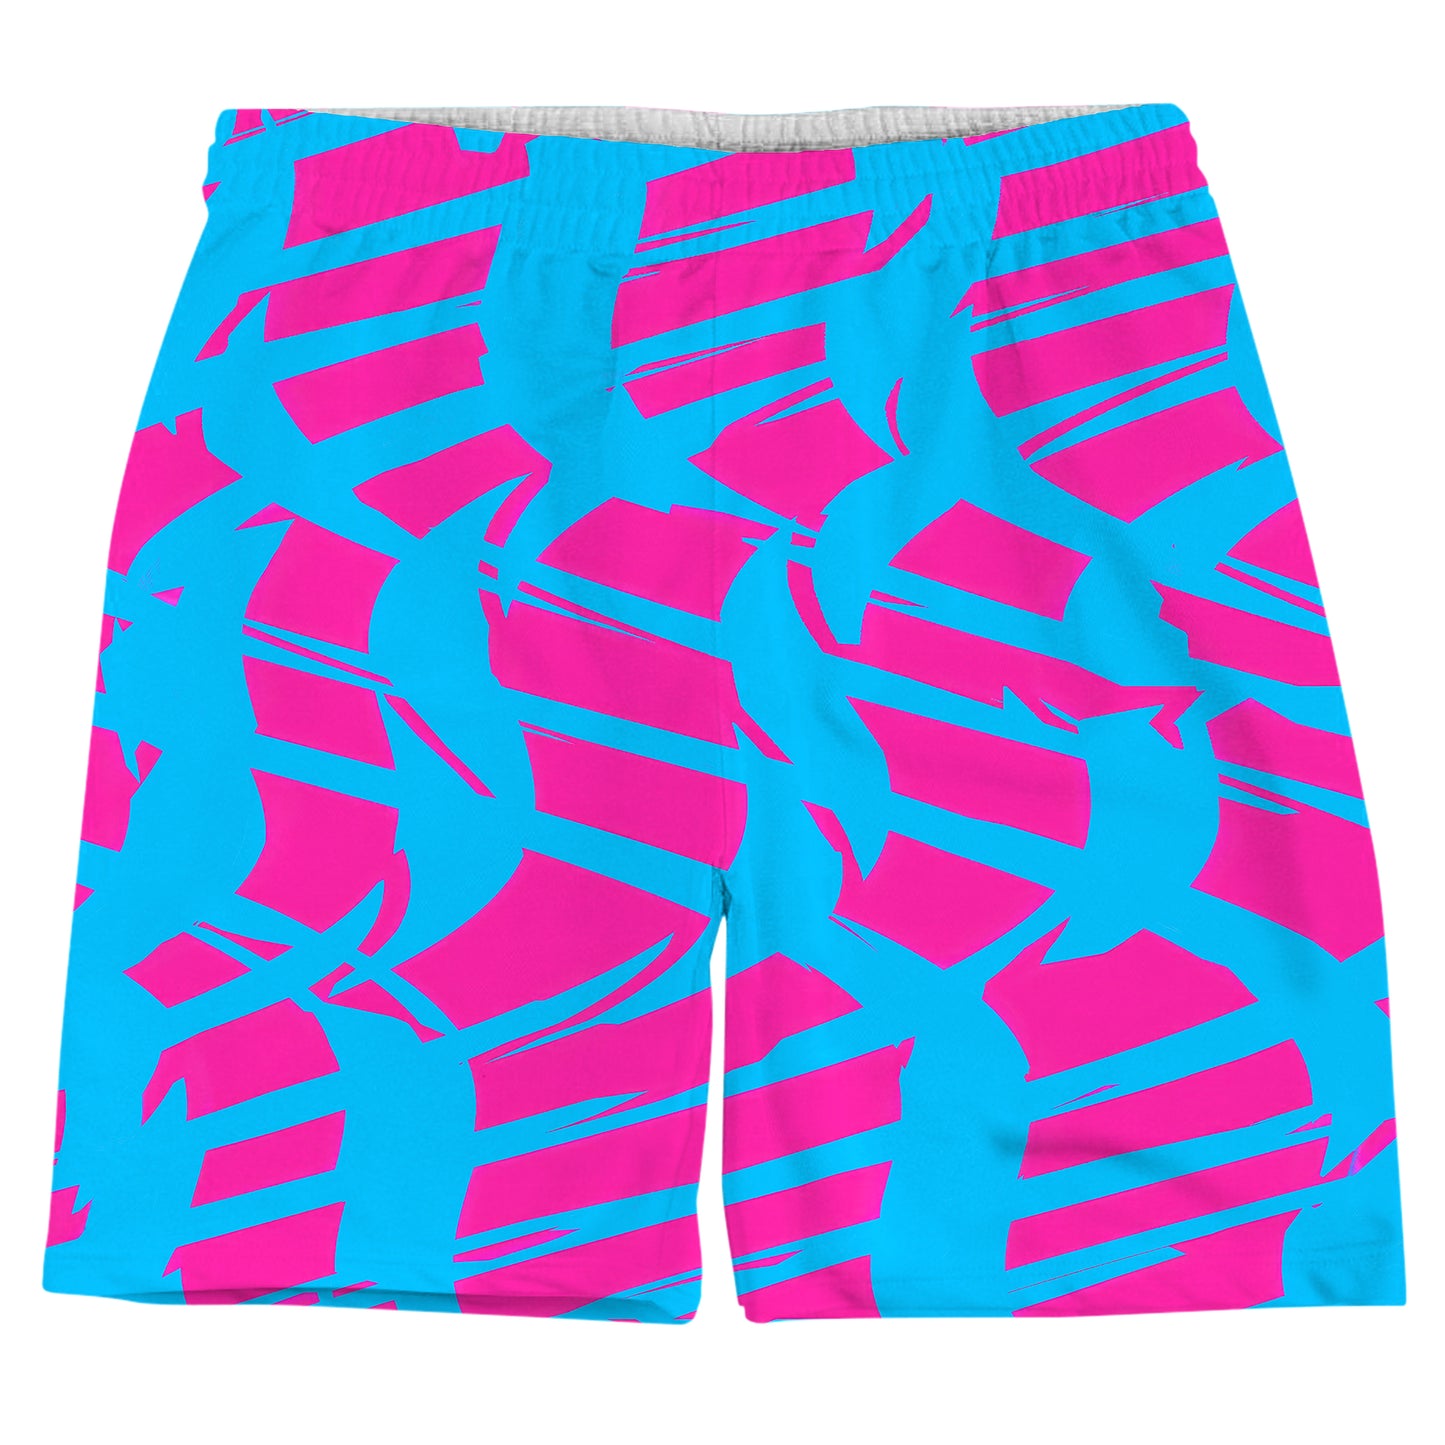 Pink and Blue Squiggly Rave Checkered Weekend Shorts, Big Tex Funkadelic, | iEDM